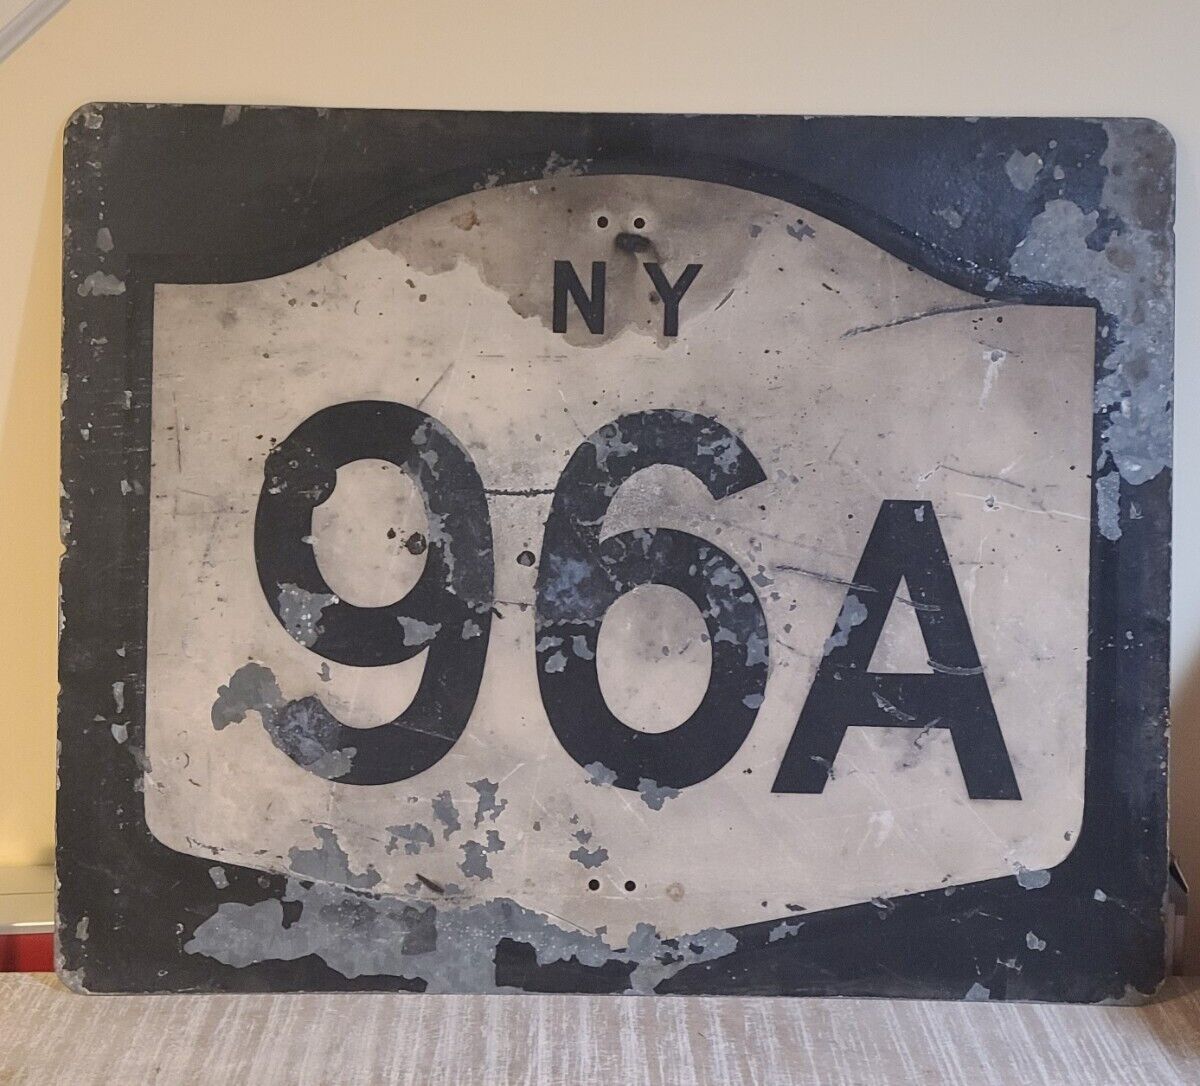 Vintage New York state highway 96A route marker road sign 30x24 Ithaca, NY Steel